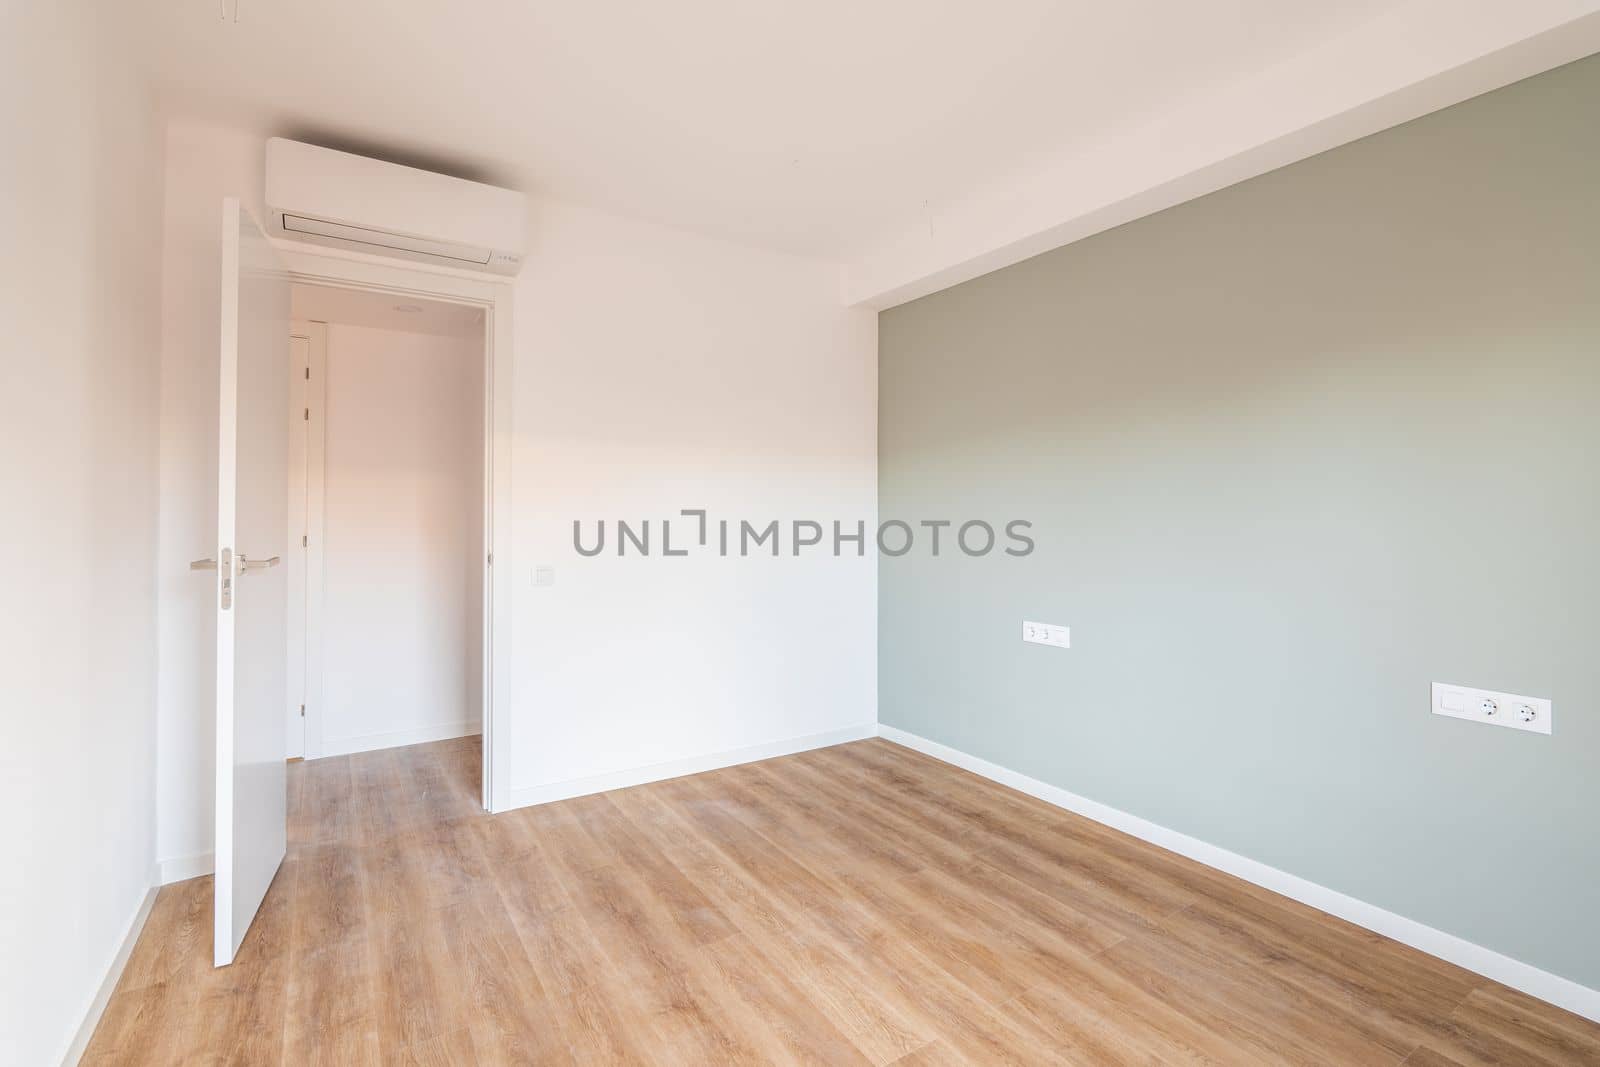 Bright spacious bedroom with parquet flooring. An open door from the room leading to a corridor with other rooms. Air conditioning above the door saves from summer heat by apavlin